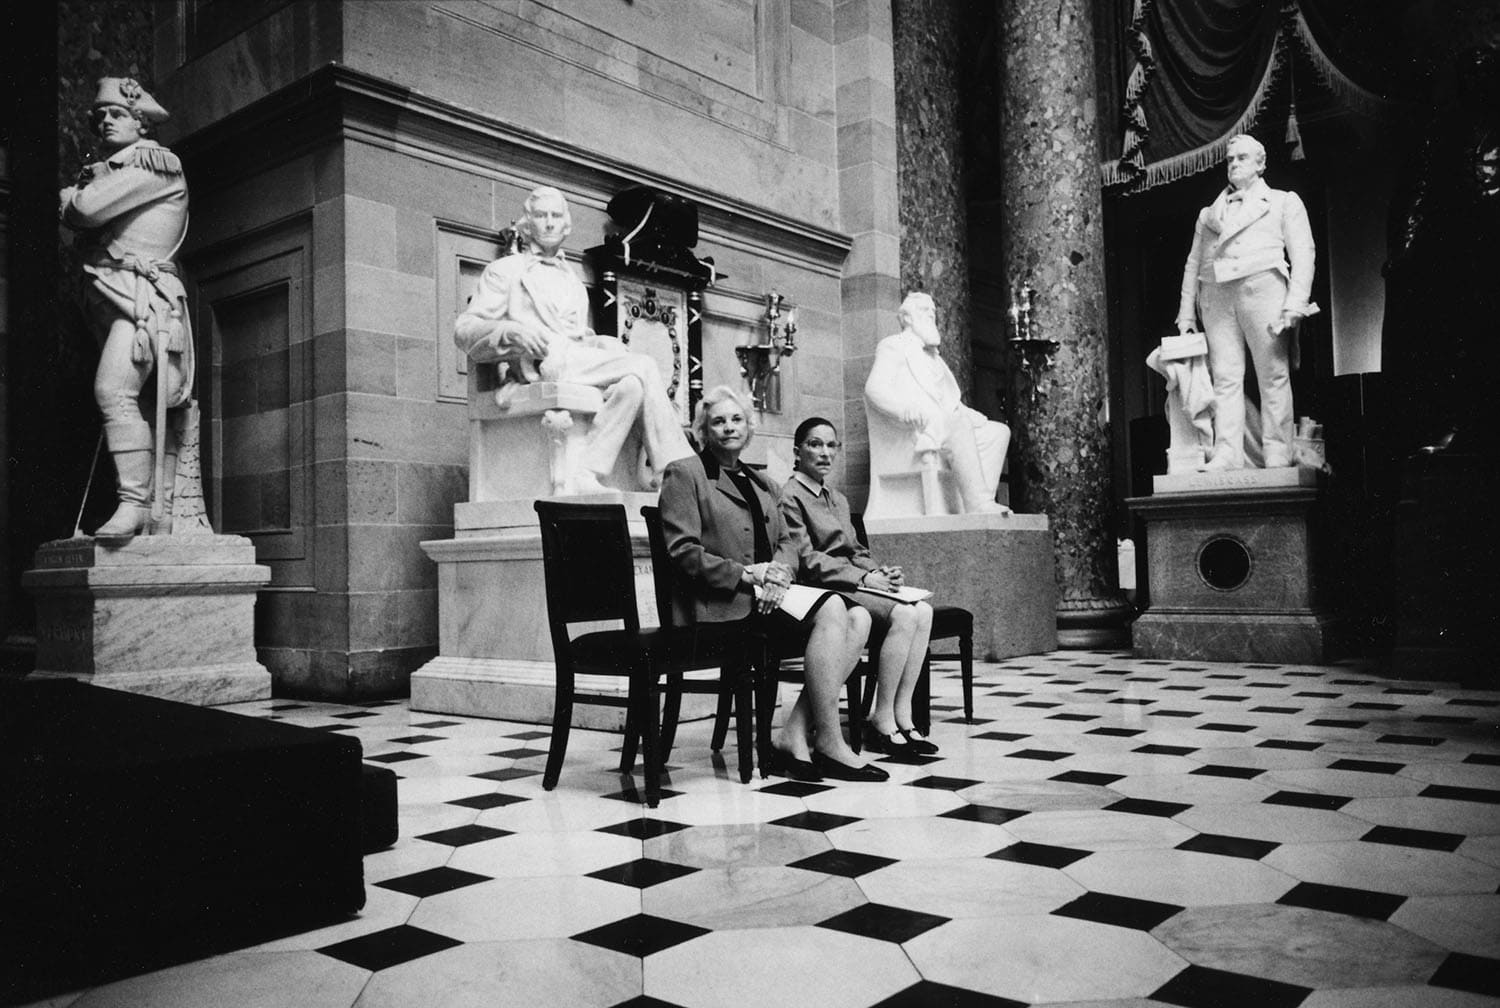 Justices O’Connor and Ginsburg surrounded by statues of men in the U.S. Capitol, 2001